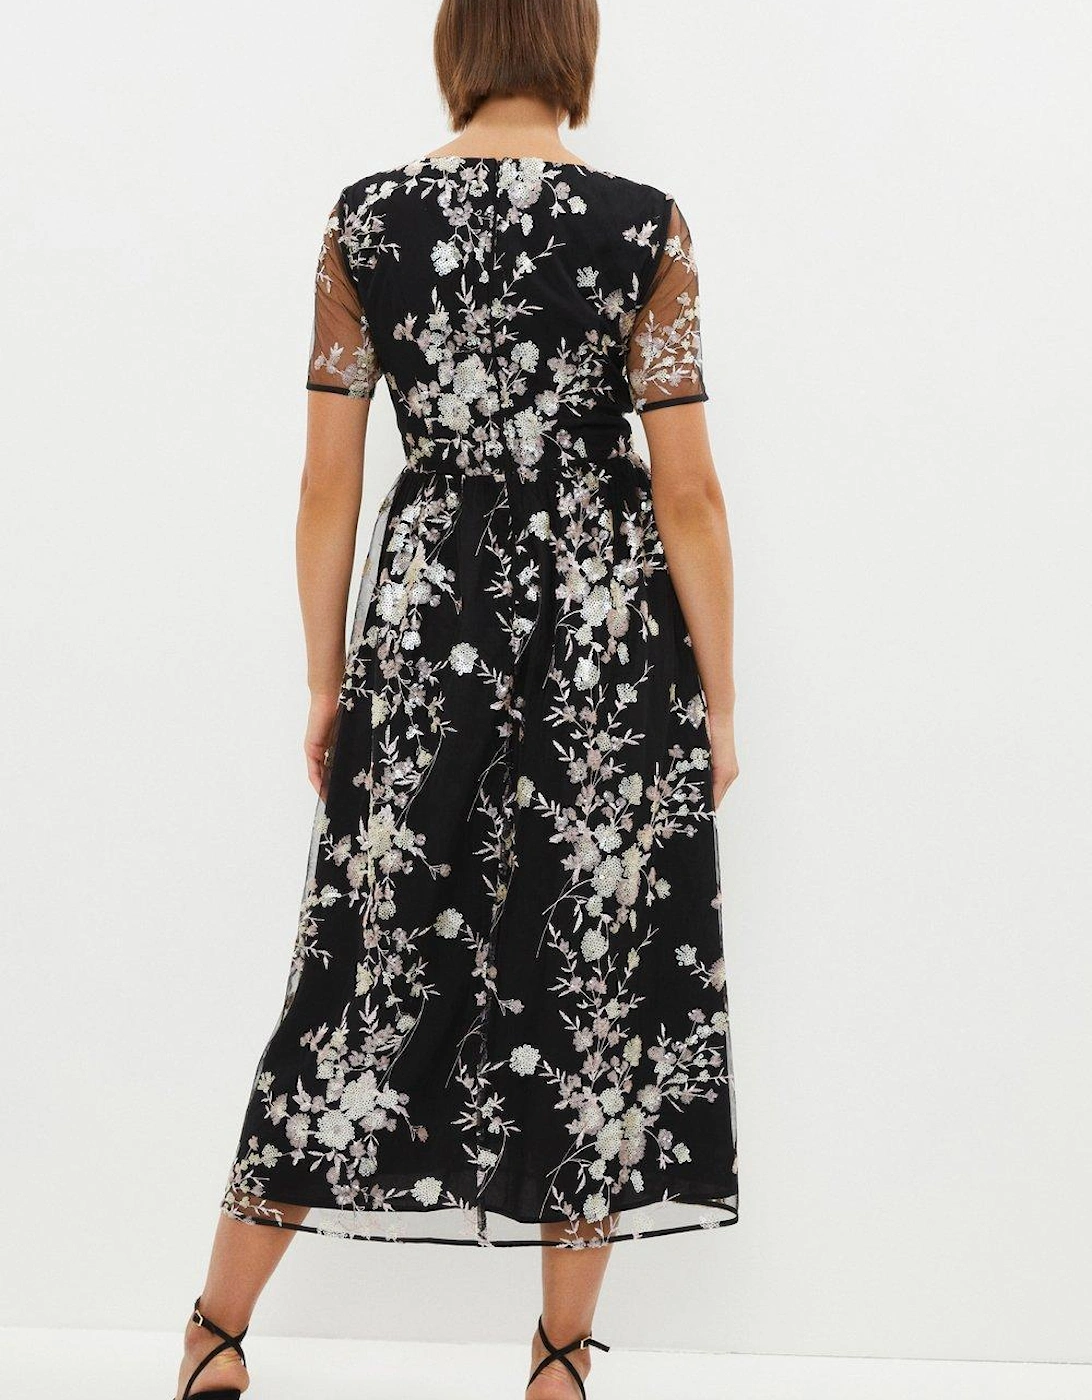 Square Neck Dress In Sequin Floral